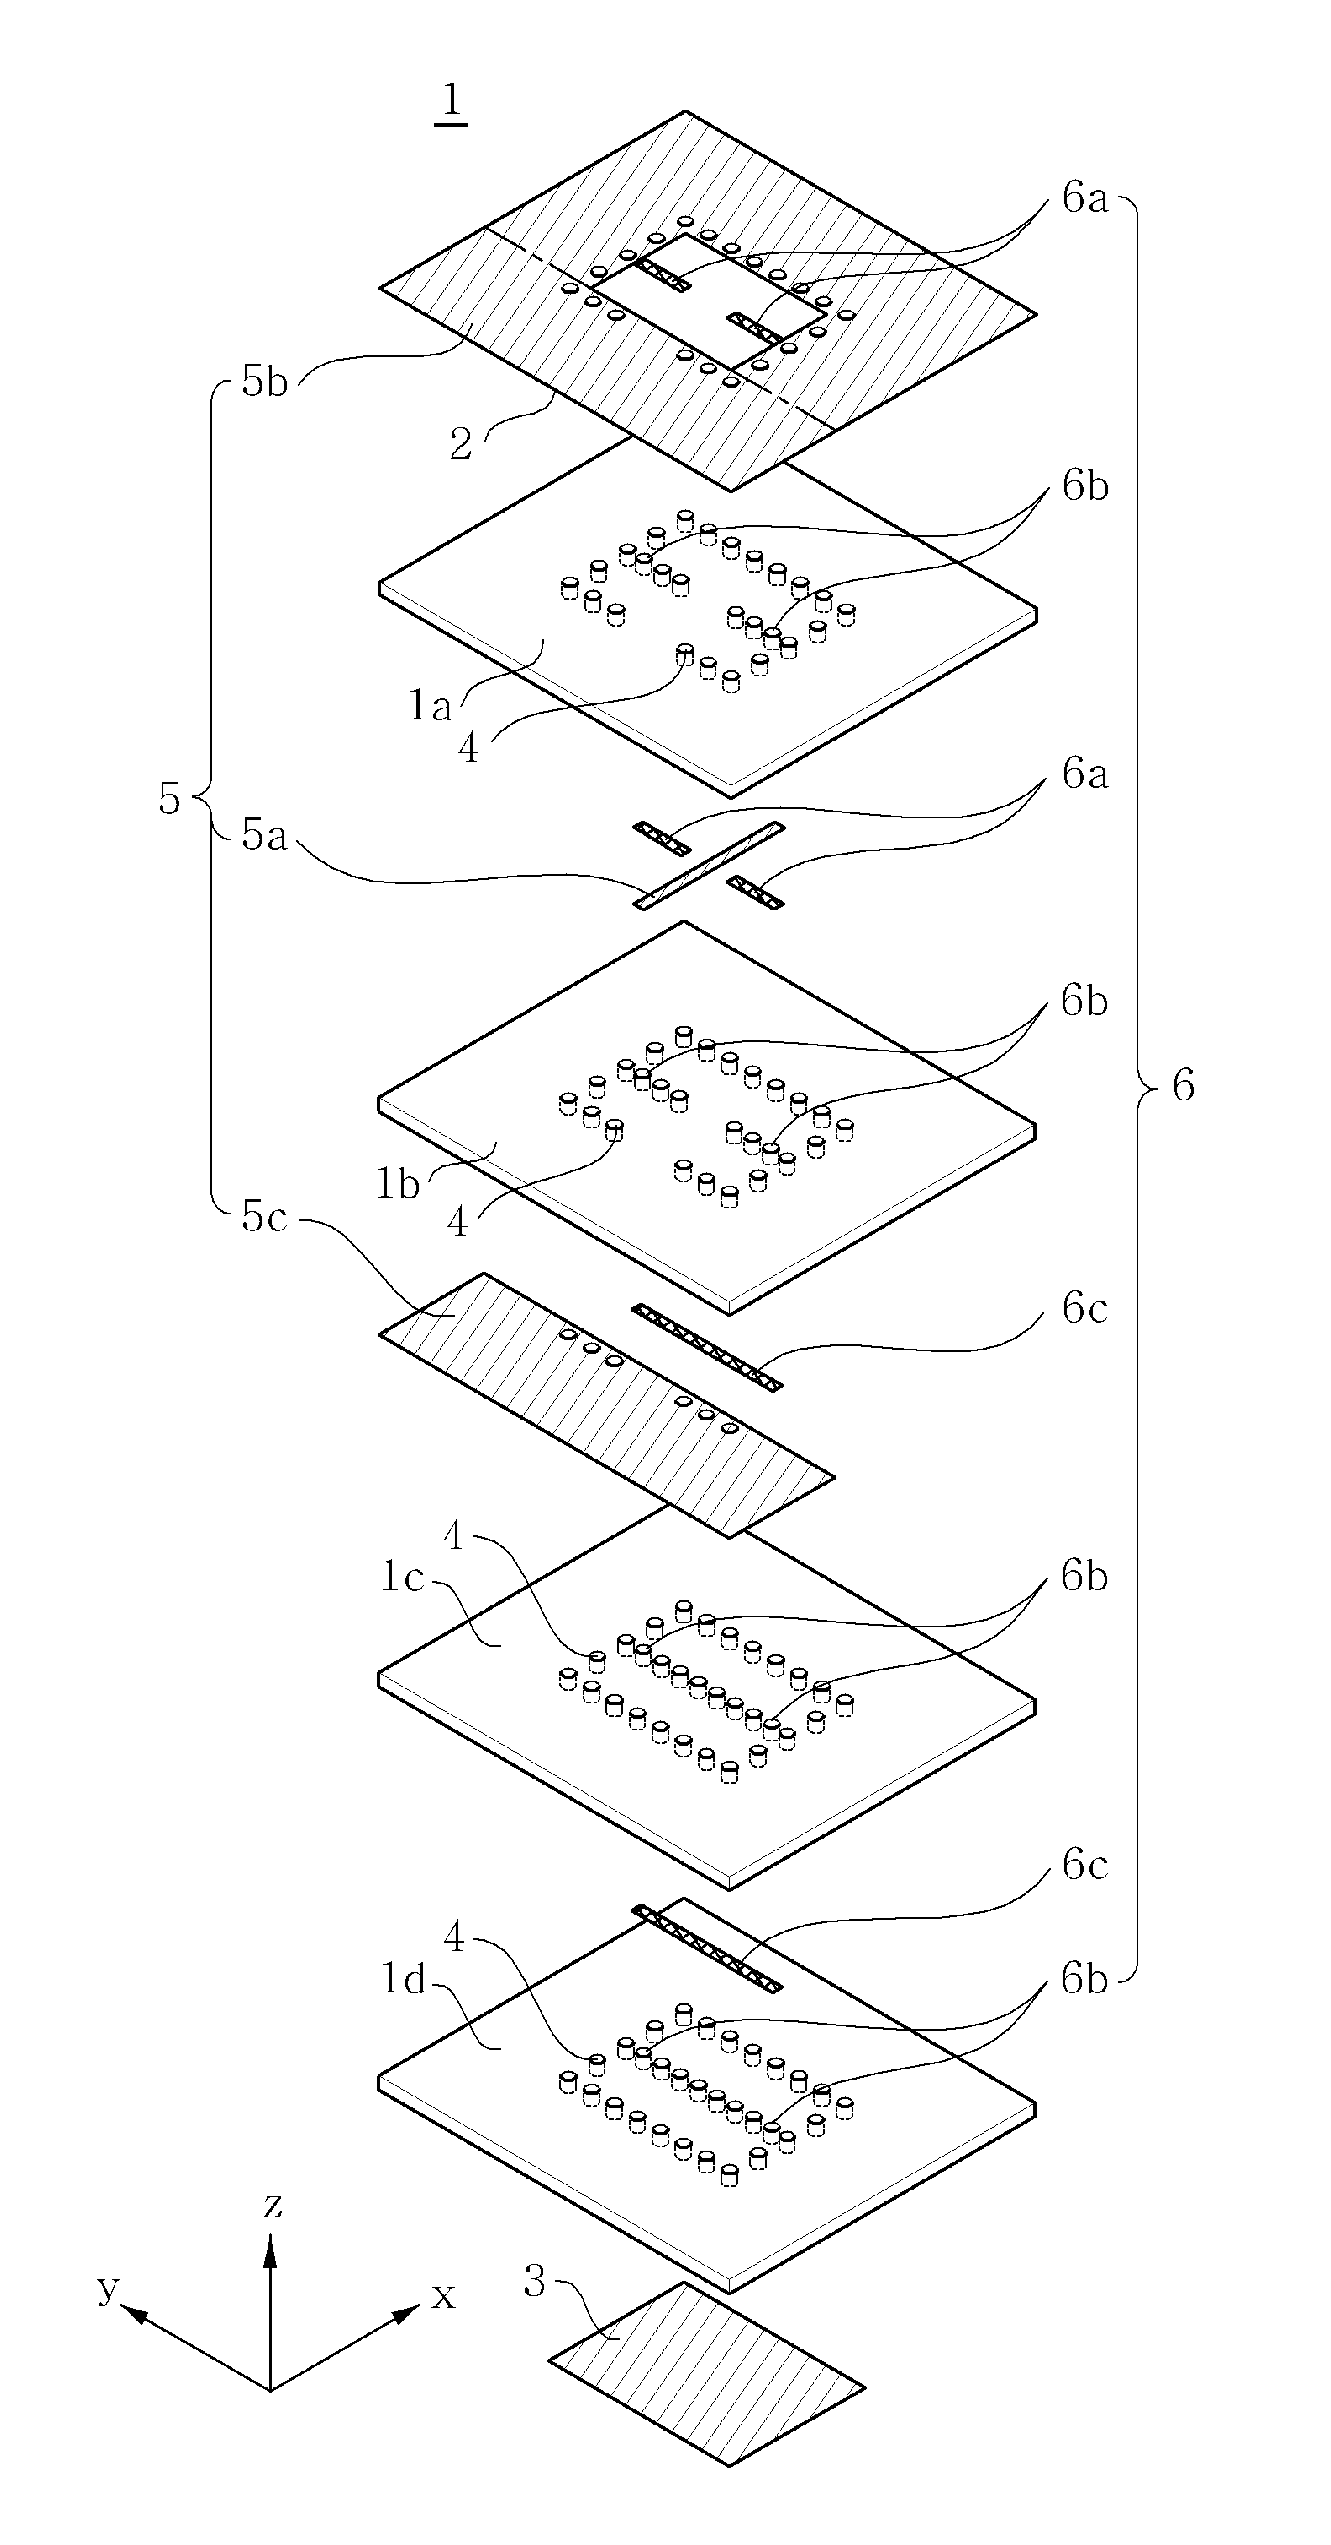 Dielectric resonator antenna embedded in multilayer substrate for enhancing bandwidth